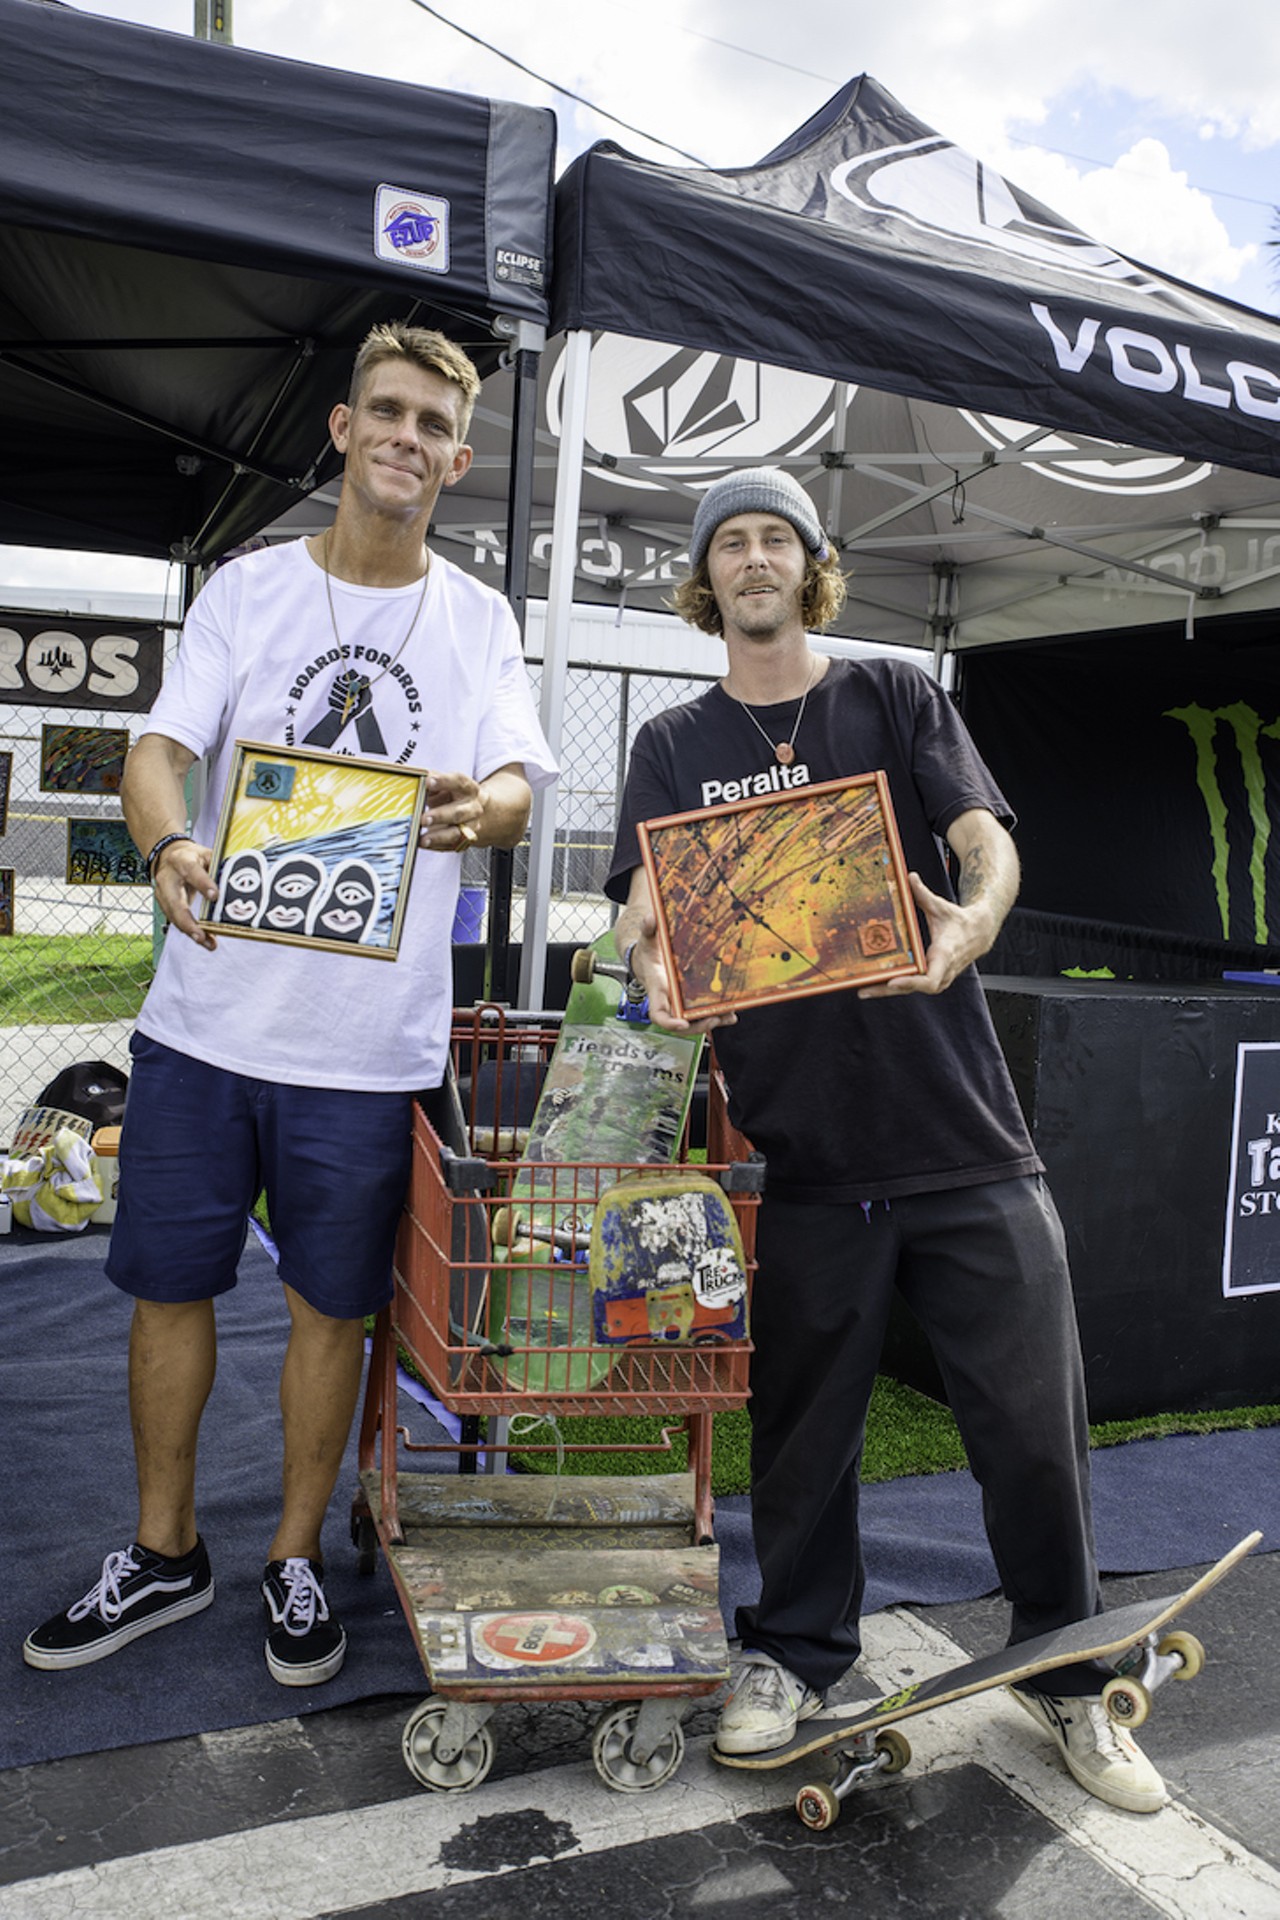 Photos: All the skaters and fans we saw at last weekend's Tampa Pro 2021